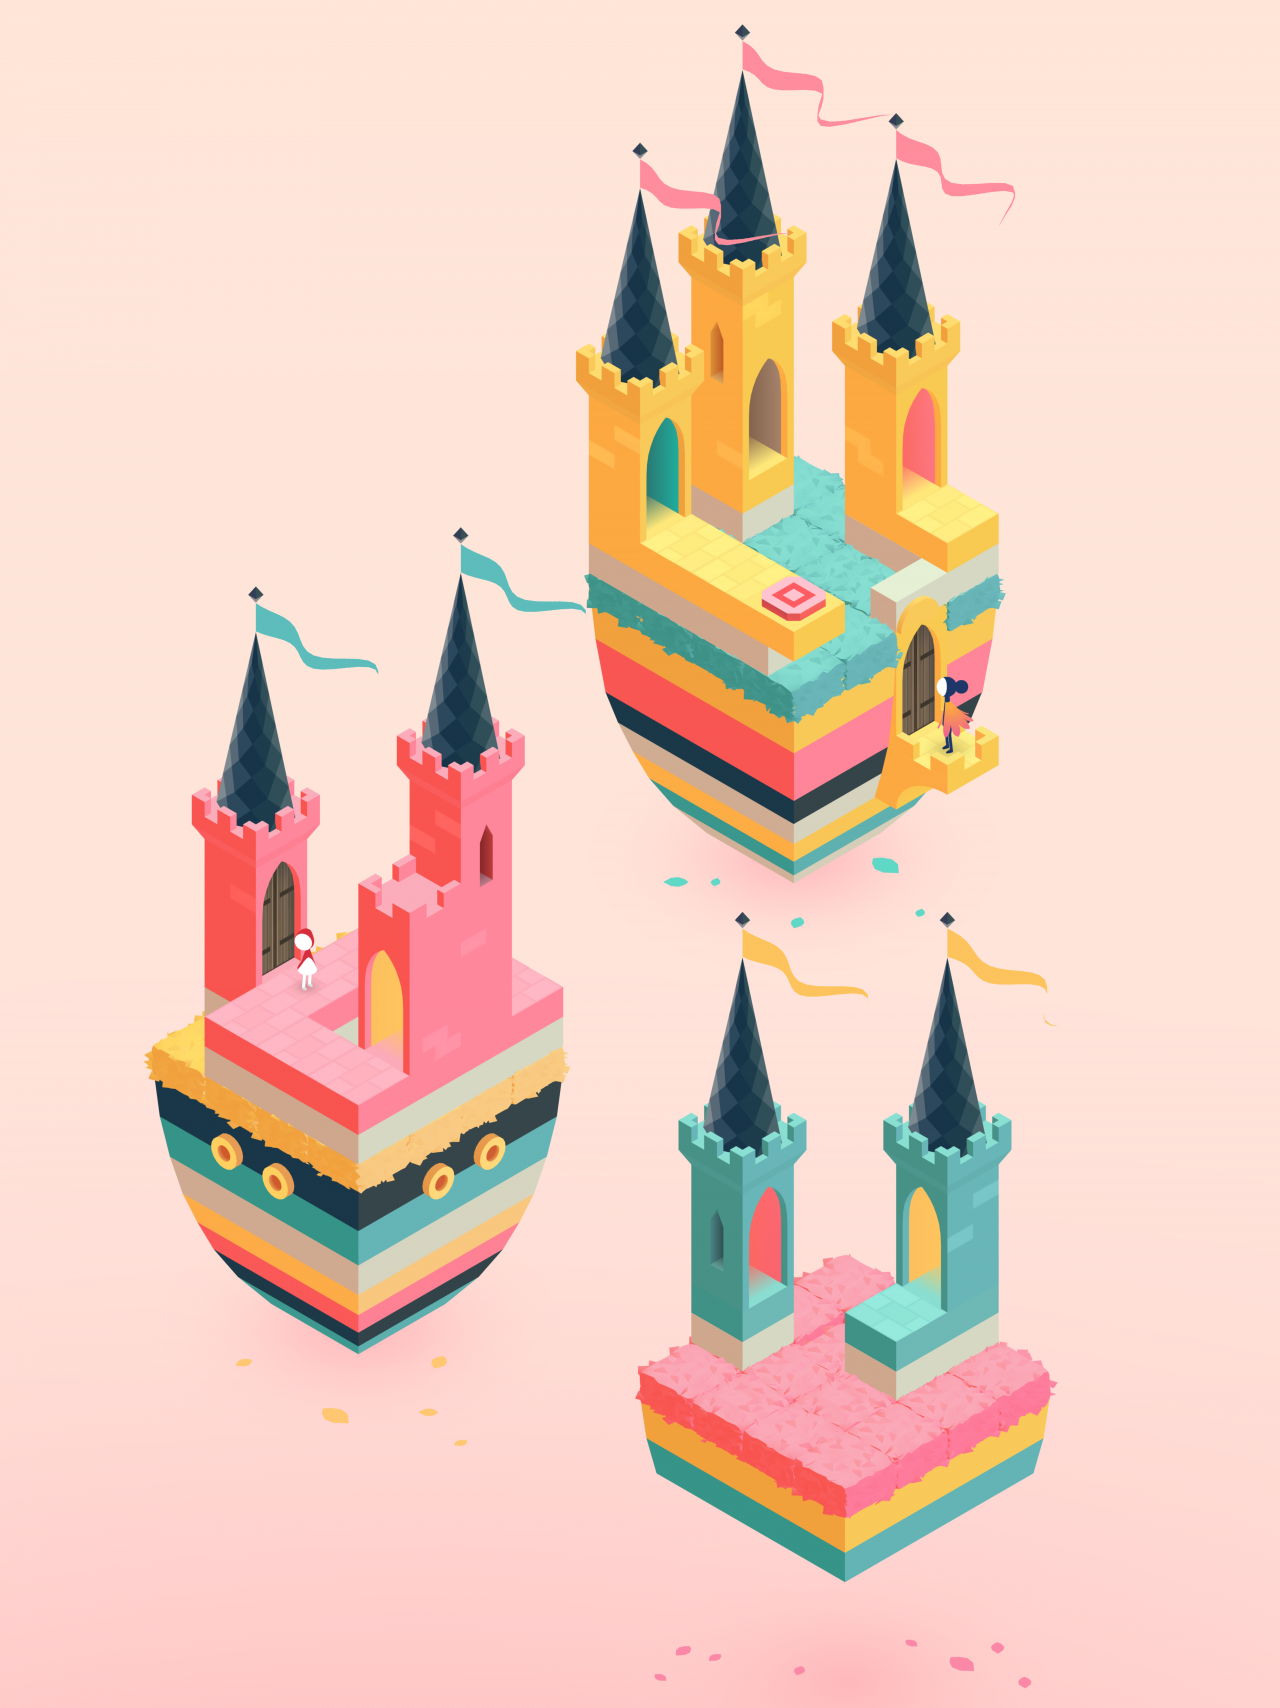 Representation of floating castles against a rosy background